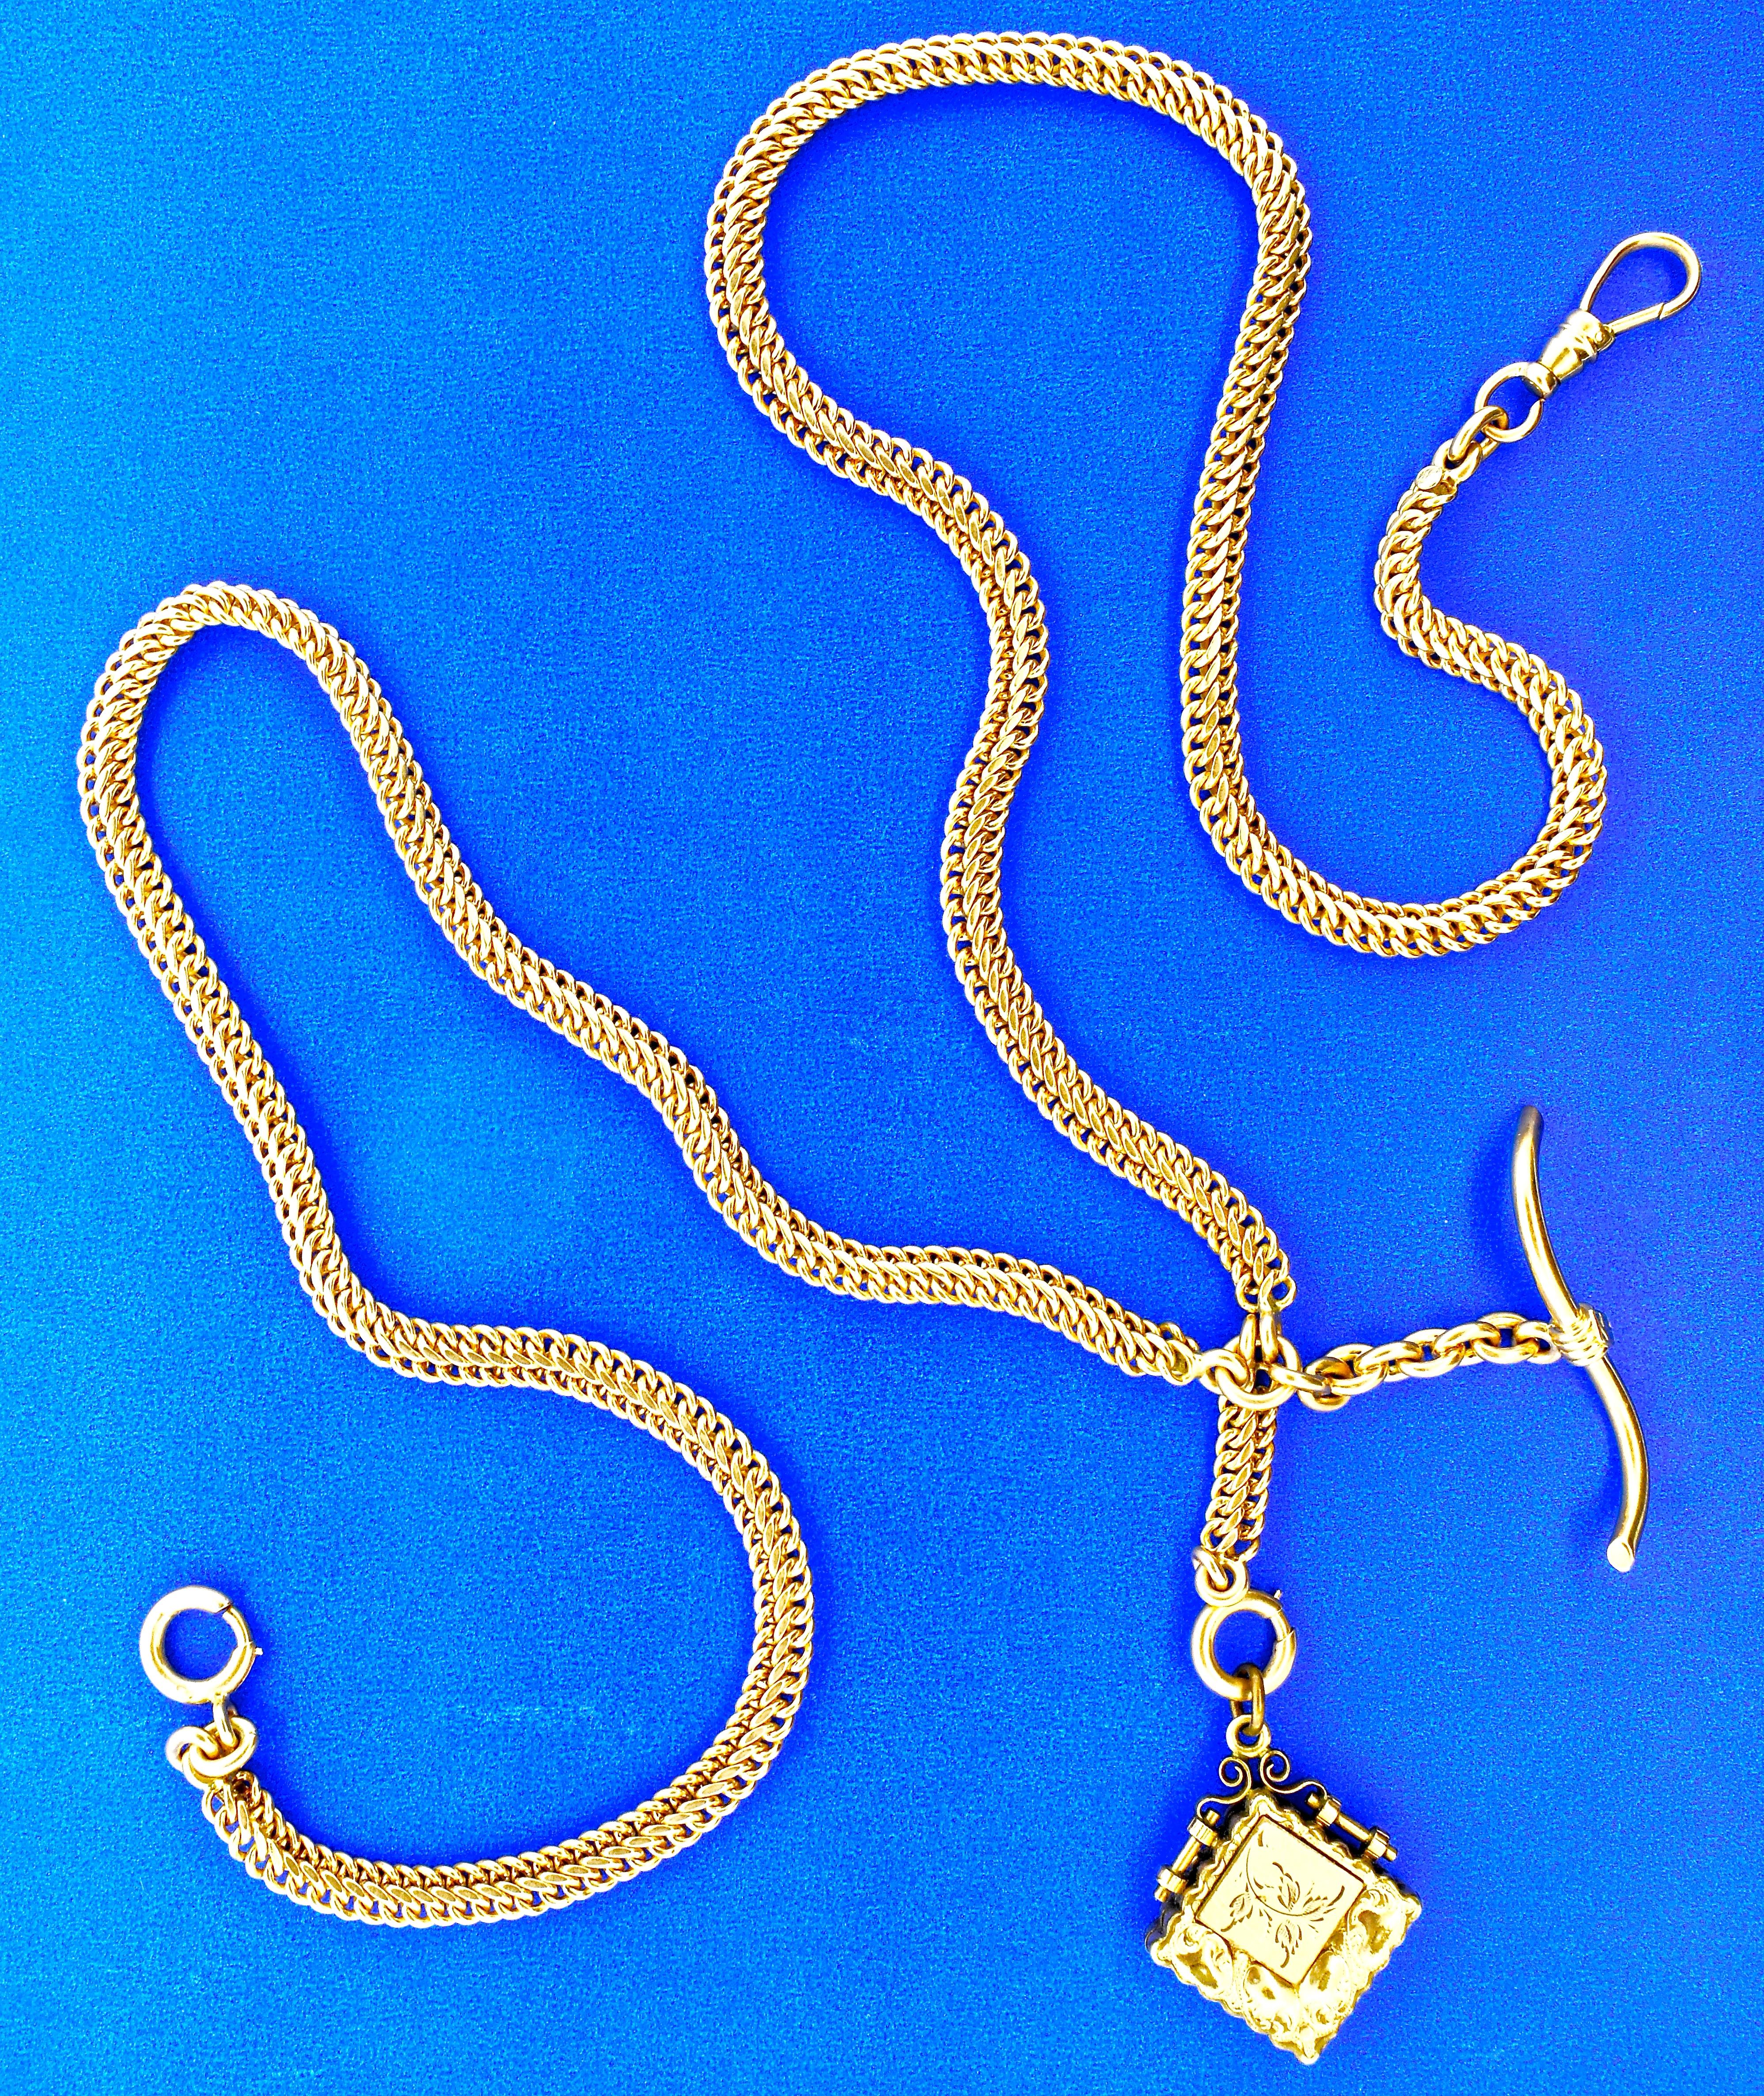 Antique Gold Chain with Fobs, circa 1900 2